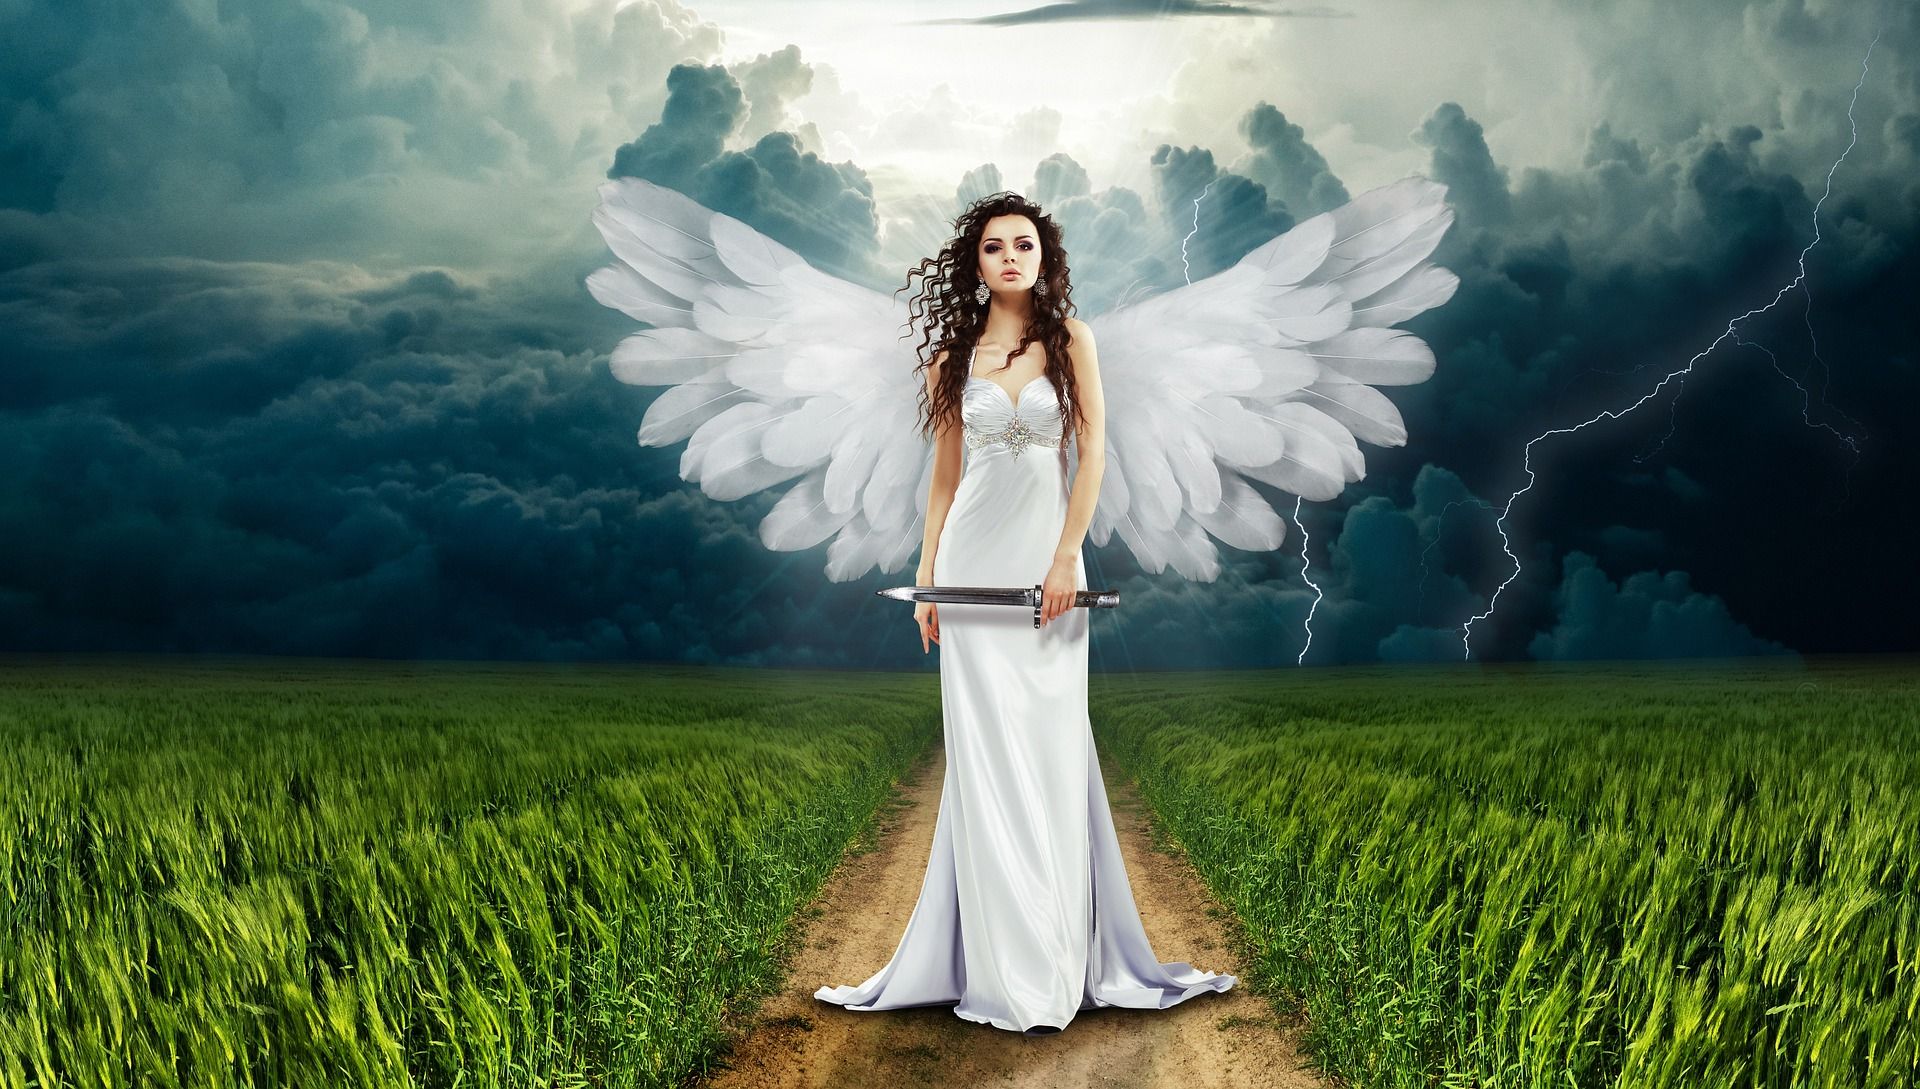 Real Look Angel Hd Wallpaper Holding Sword - Angel With White Wings - HD Wallpaper 